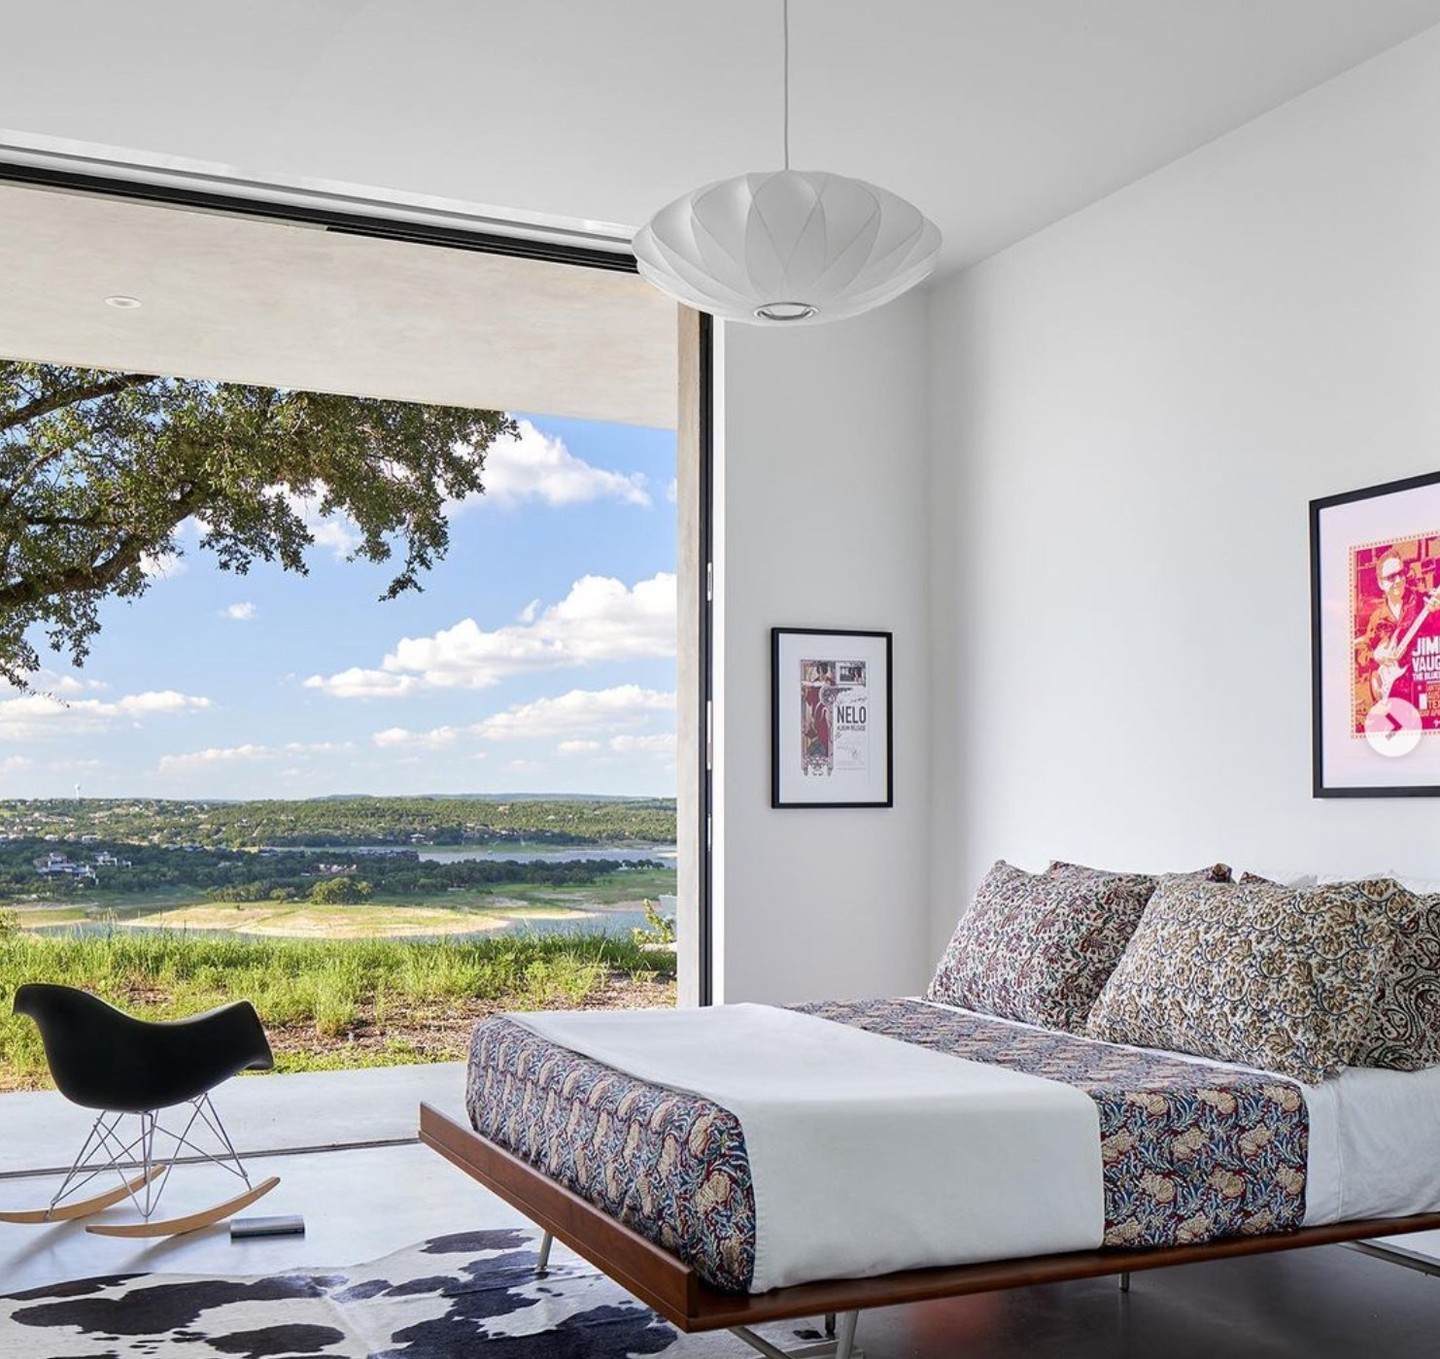 Rocking mid-century style overlooking the Texas Hill Country.⁠
⁠
Built by @foursquarebuilders ⁠
Photo by @drorbaldingerphotographer ⁠
Designed by @dc_architecture⁠
⁠
⁠
⁠
⁠